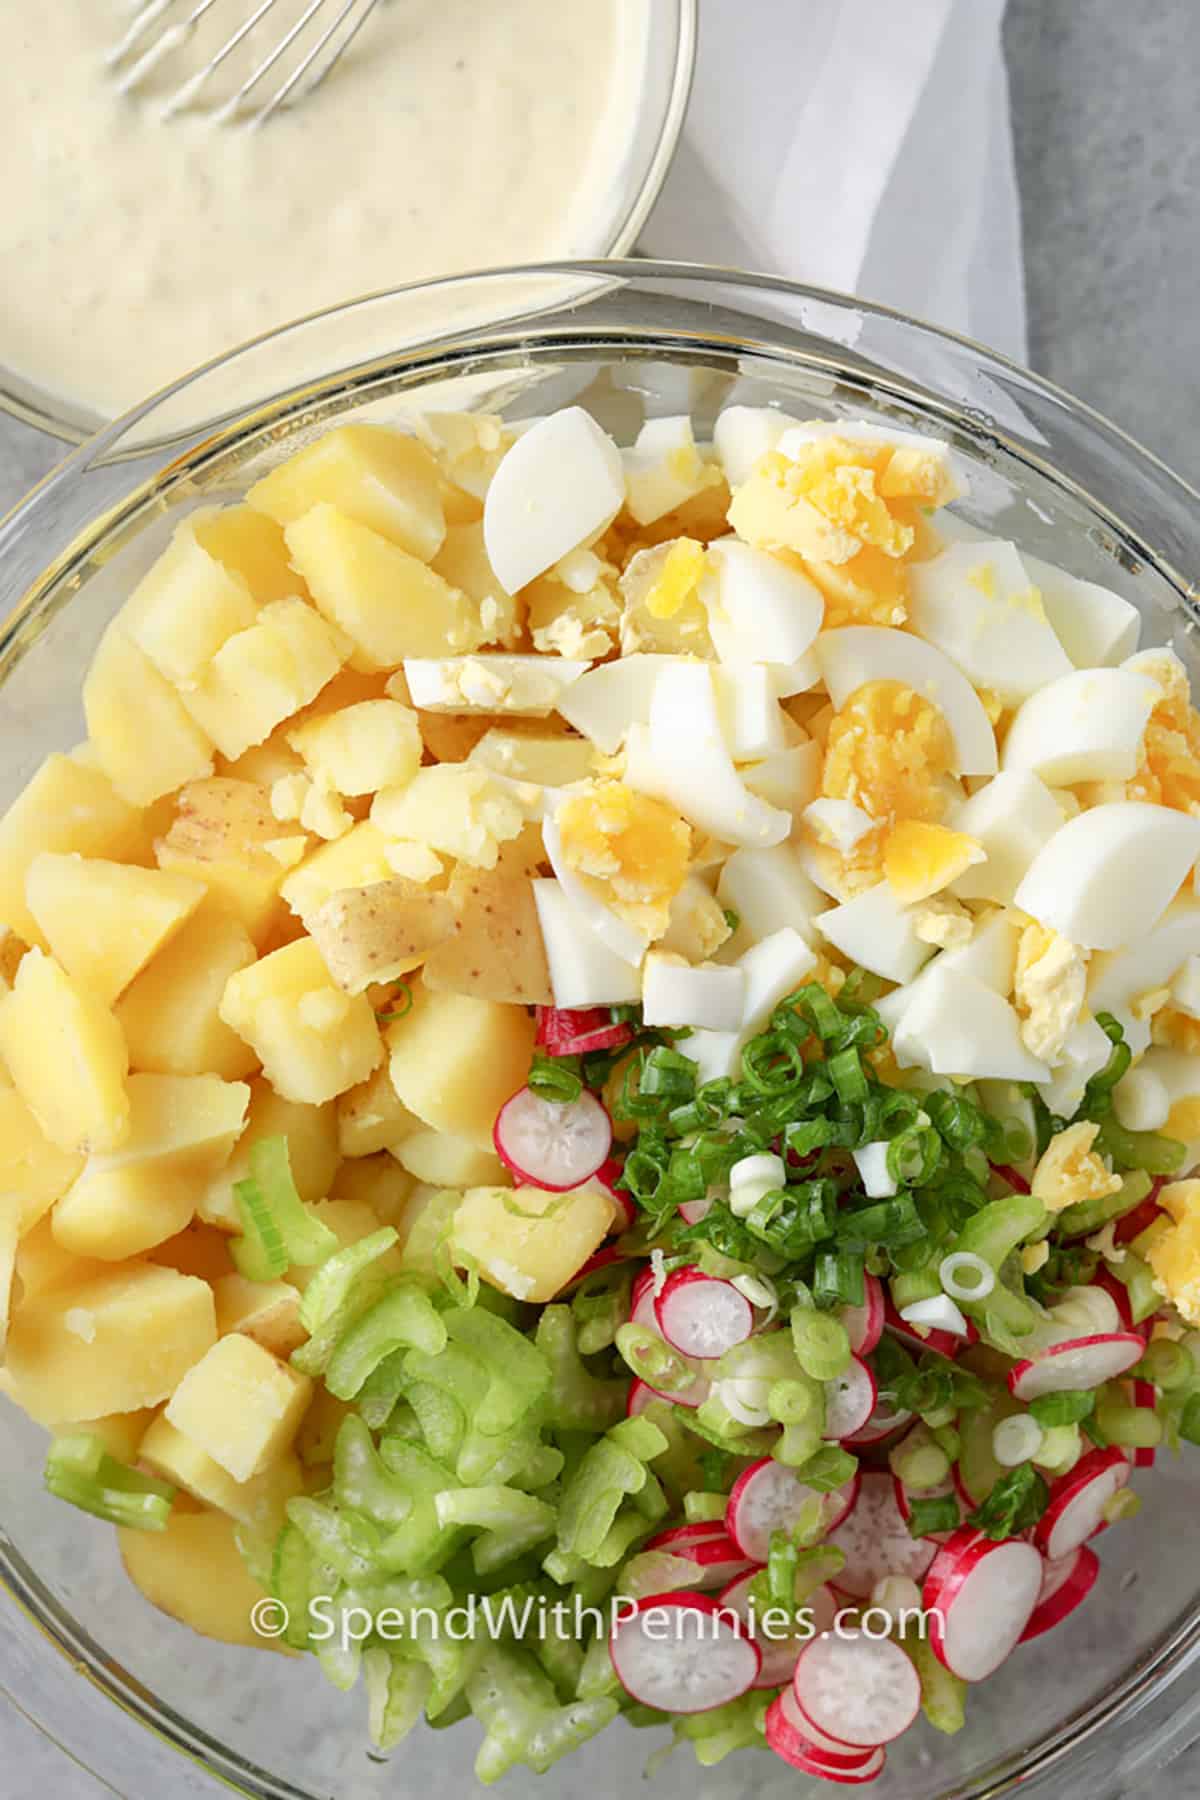 ingredients in a bowl to make The Best Potato Salad